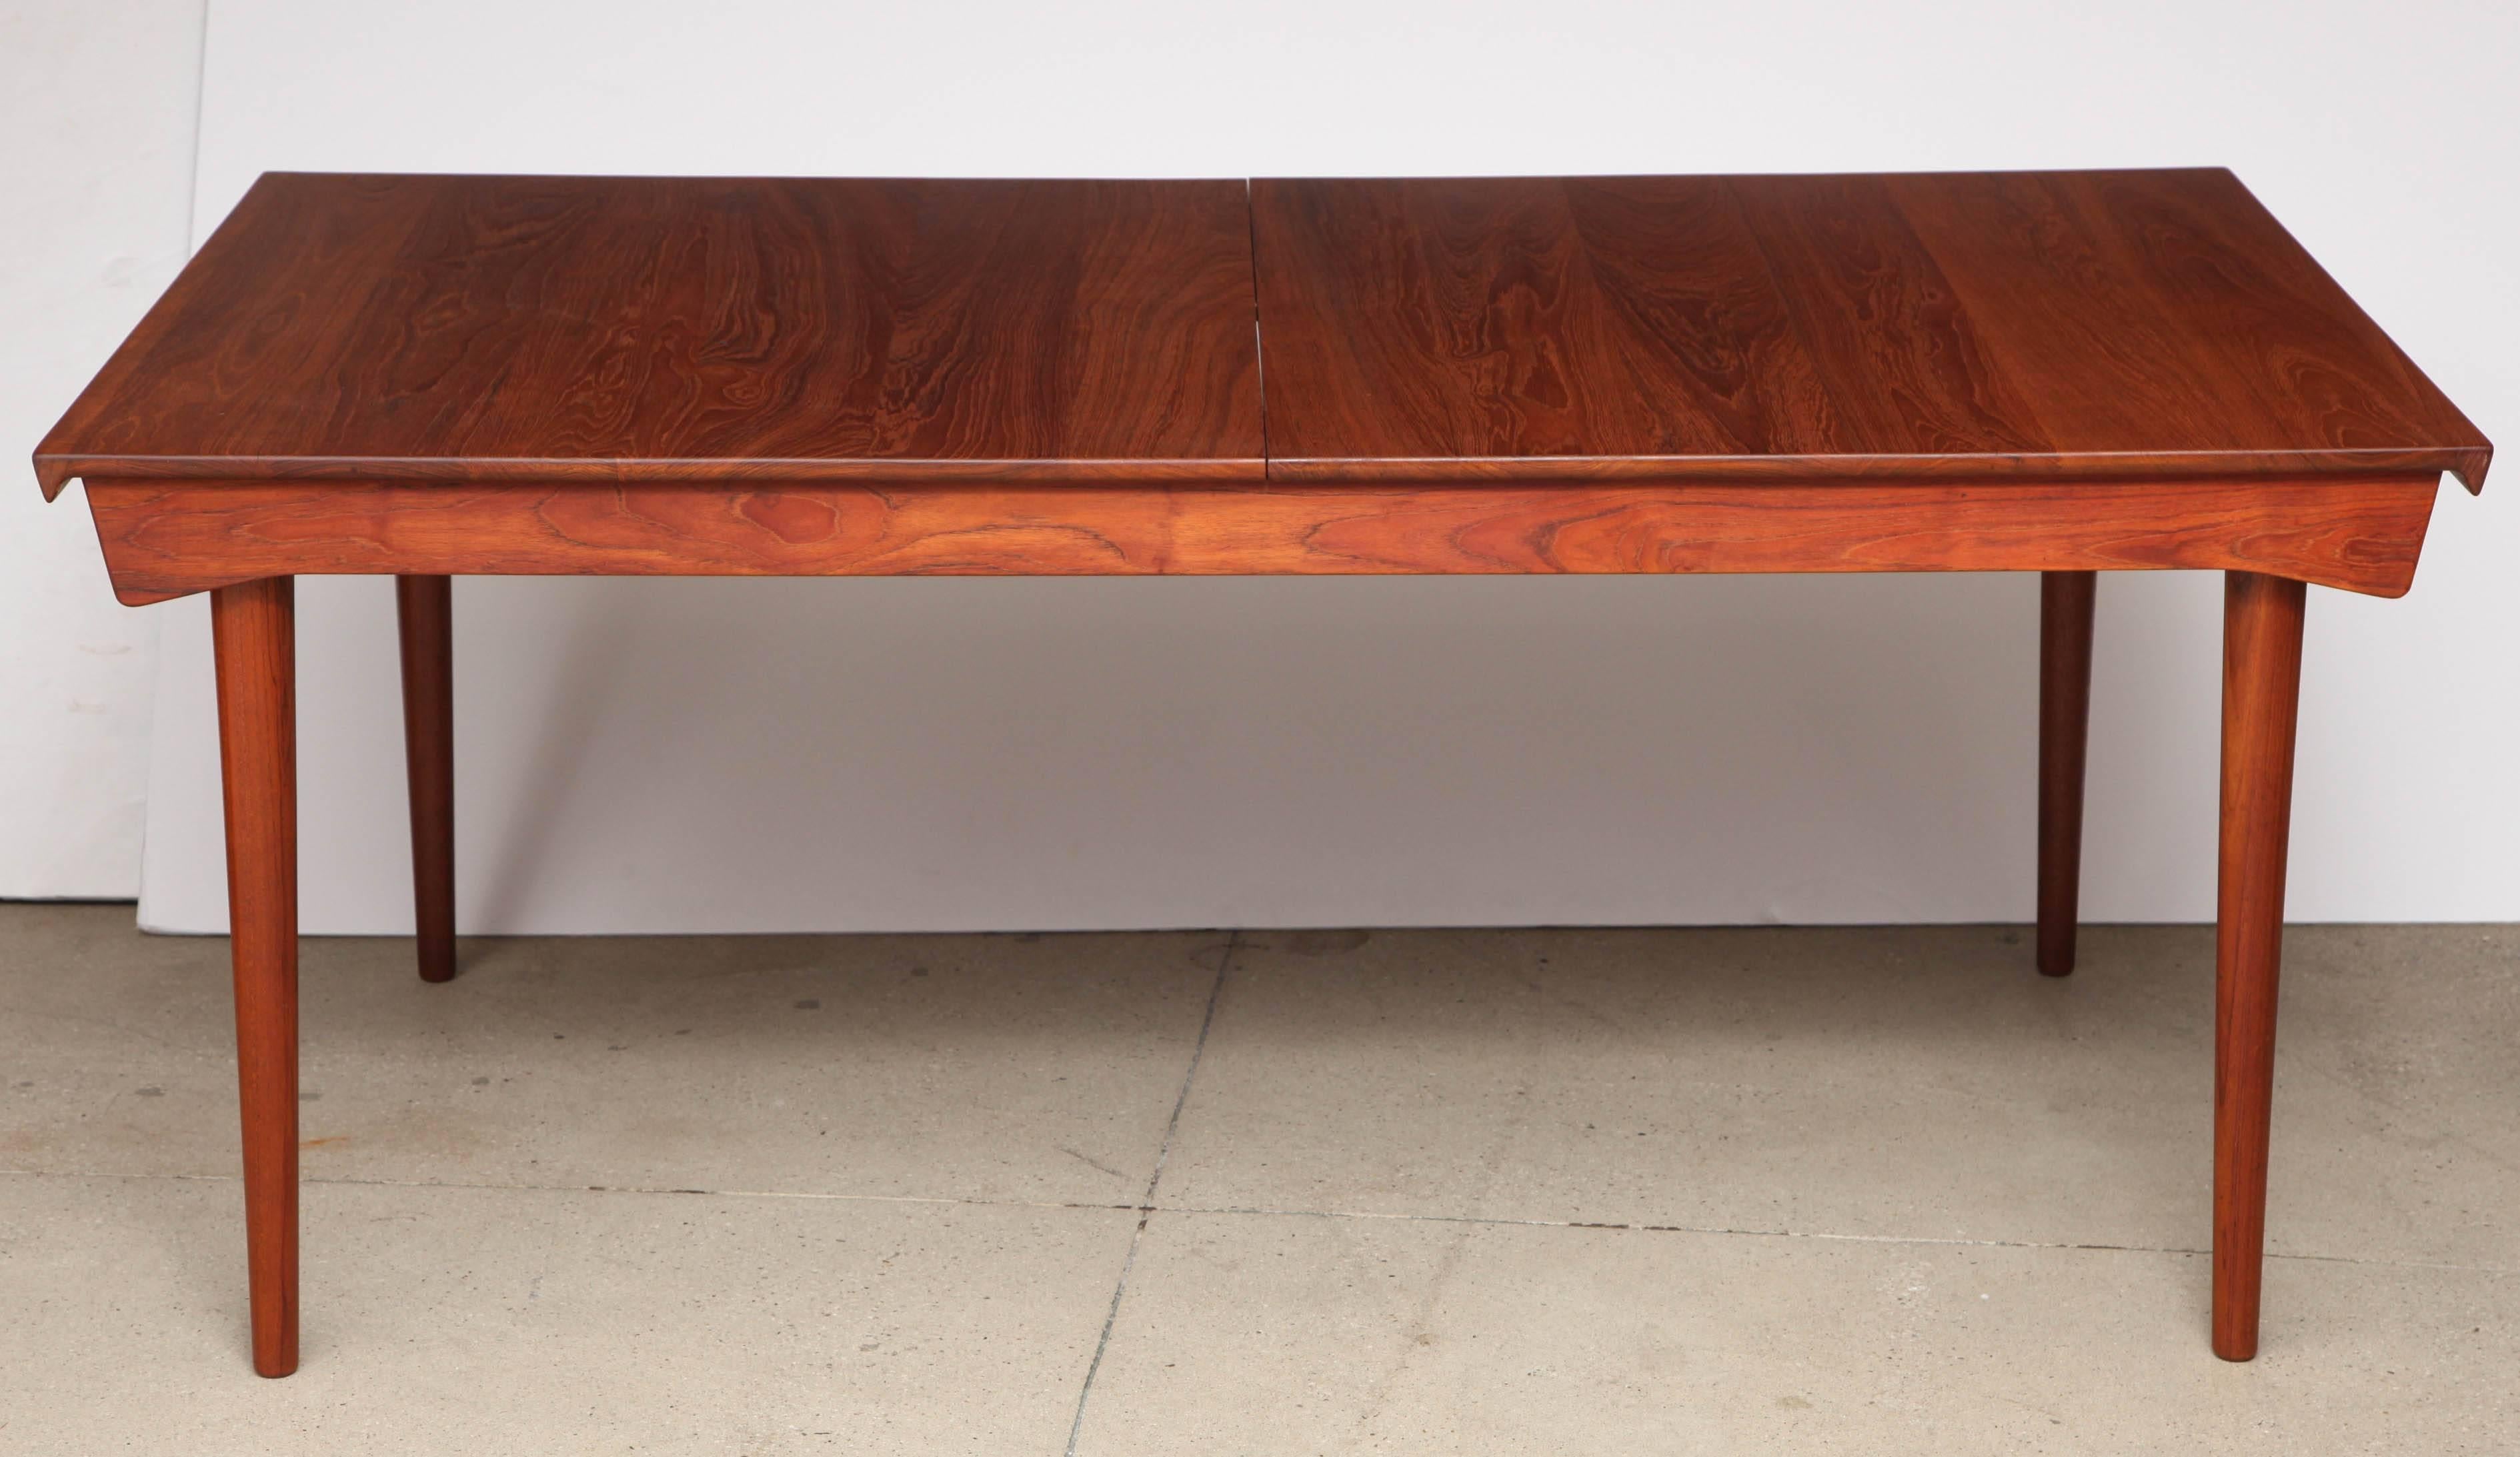 Vintage 1950s Teak Dining Table by Finn Juhl

This Danish Modern dining table designed by Finn Juhl in the mid-1950s. Two 19.5